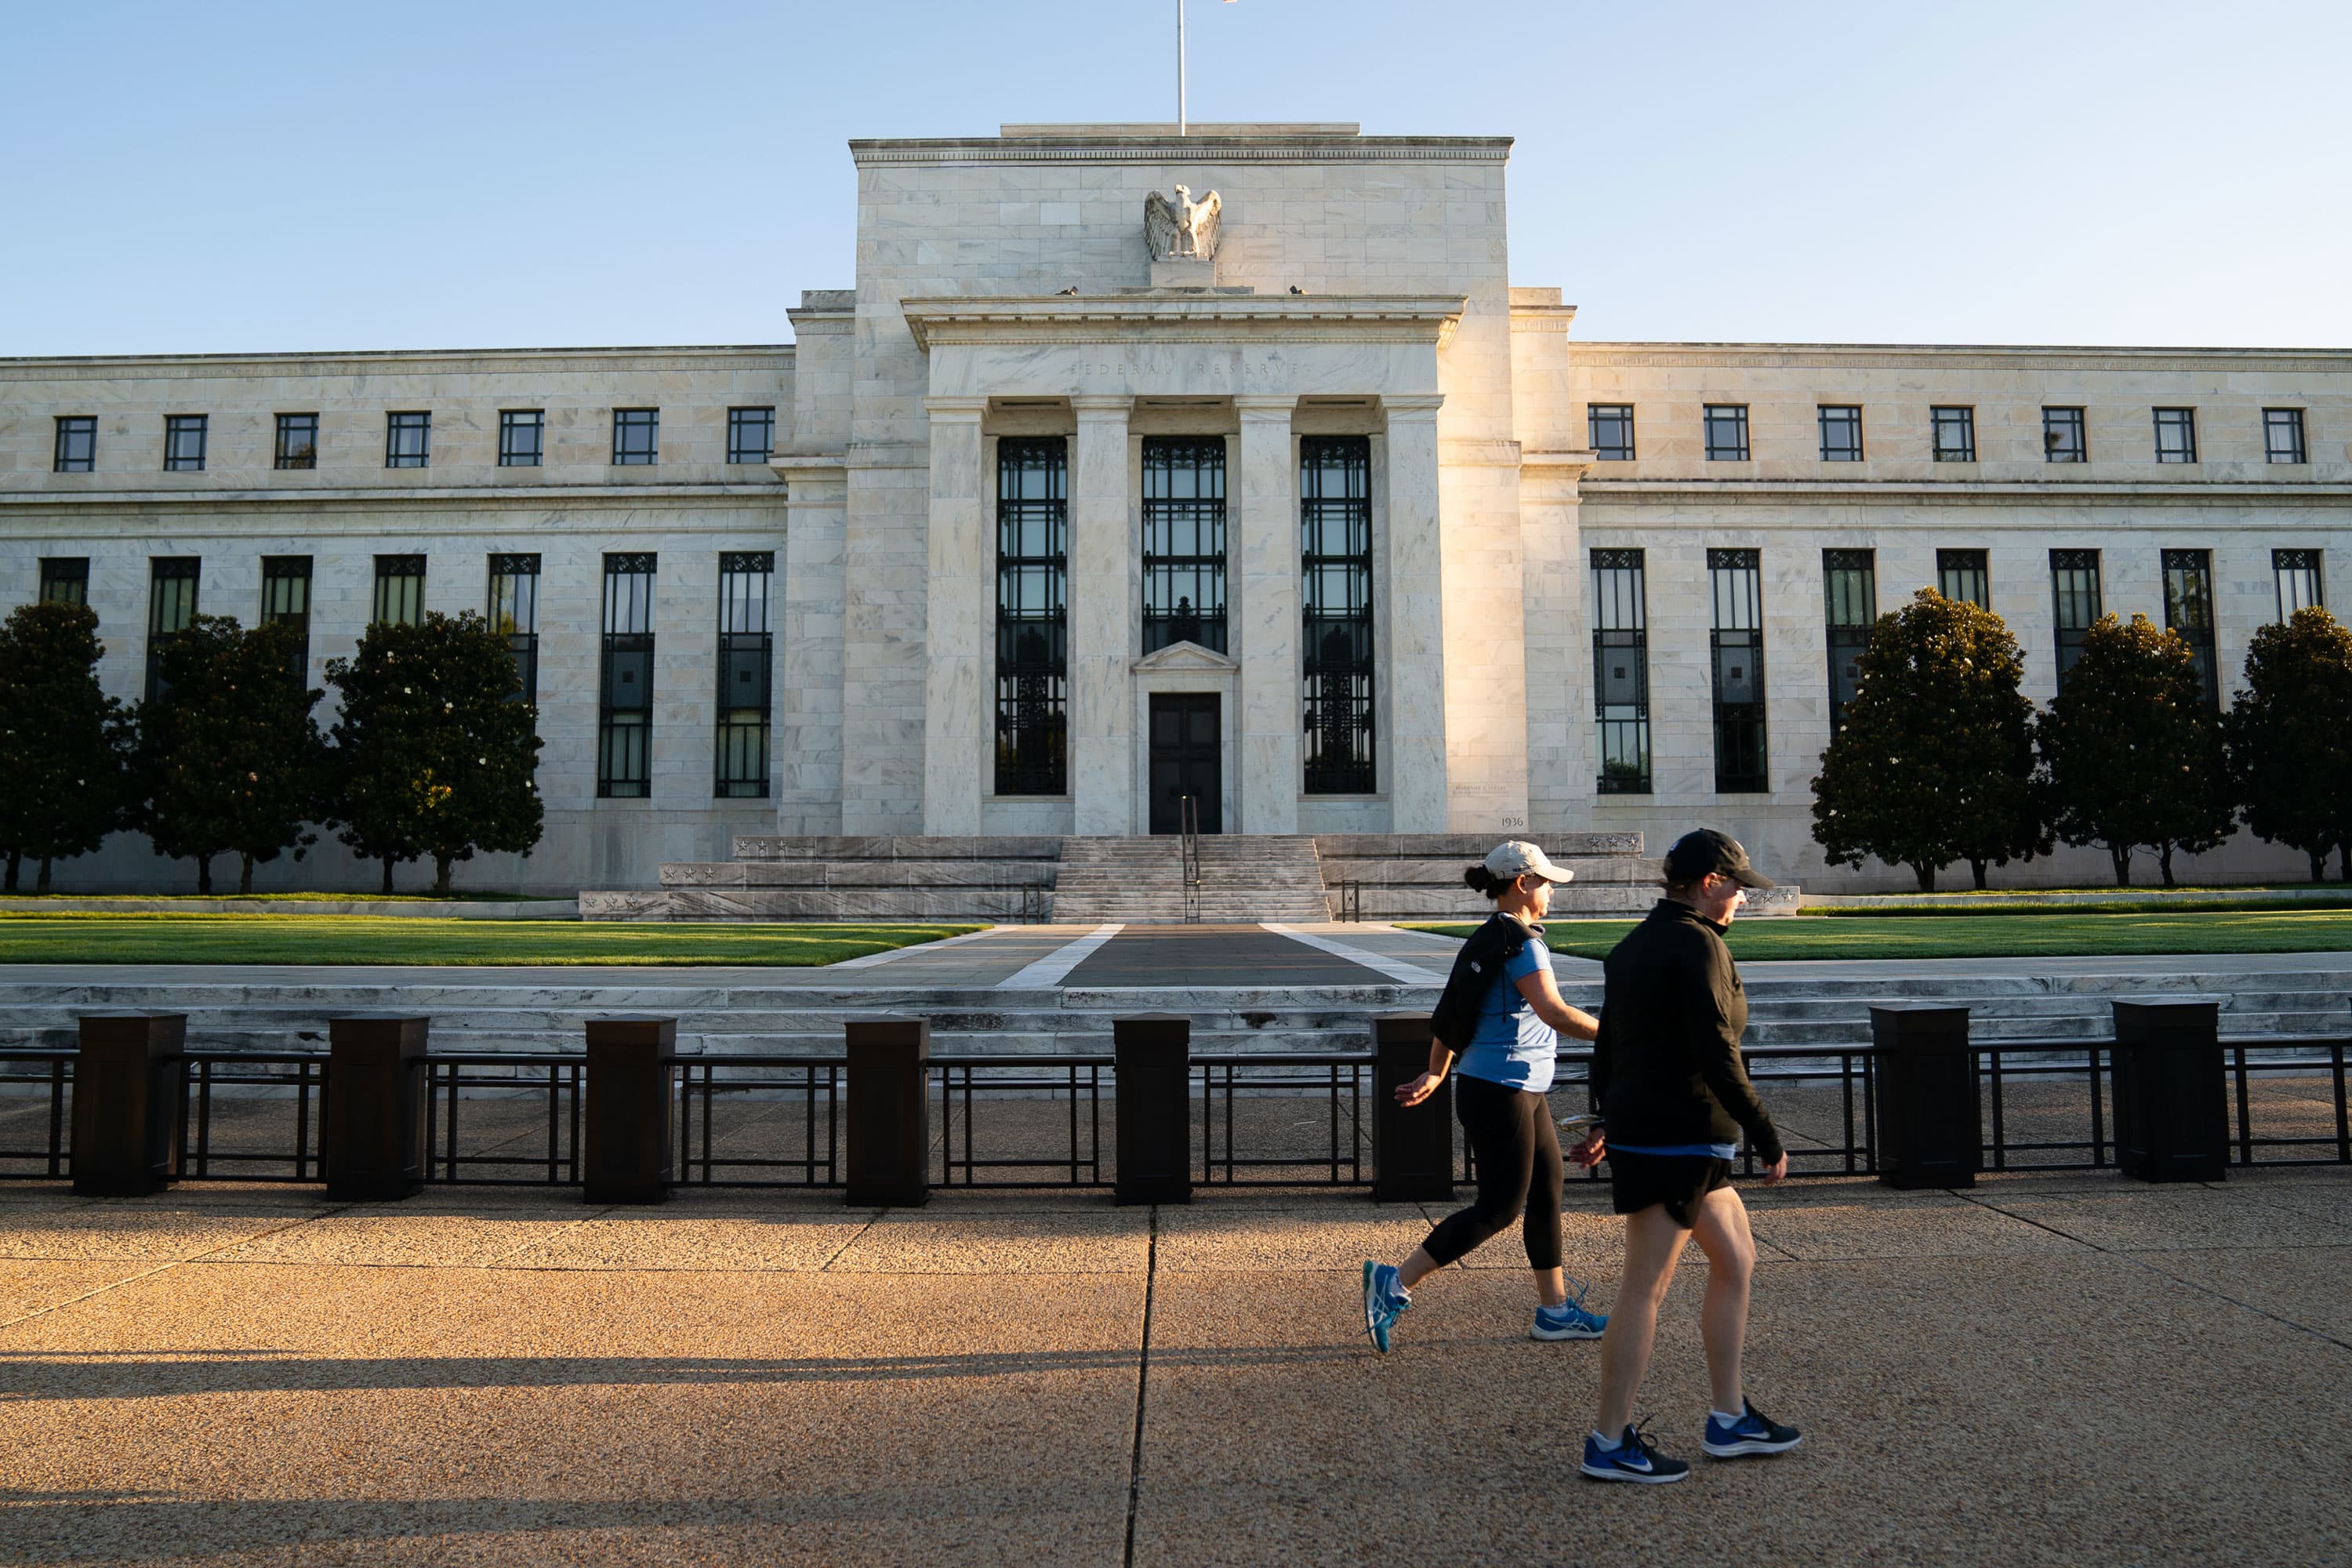 Record high stocks as investors await Fed guidance – What to watch for